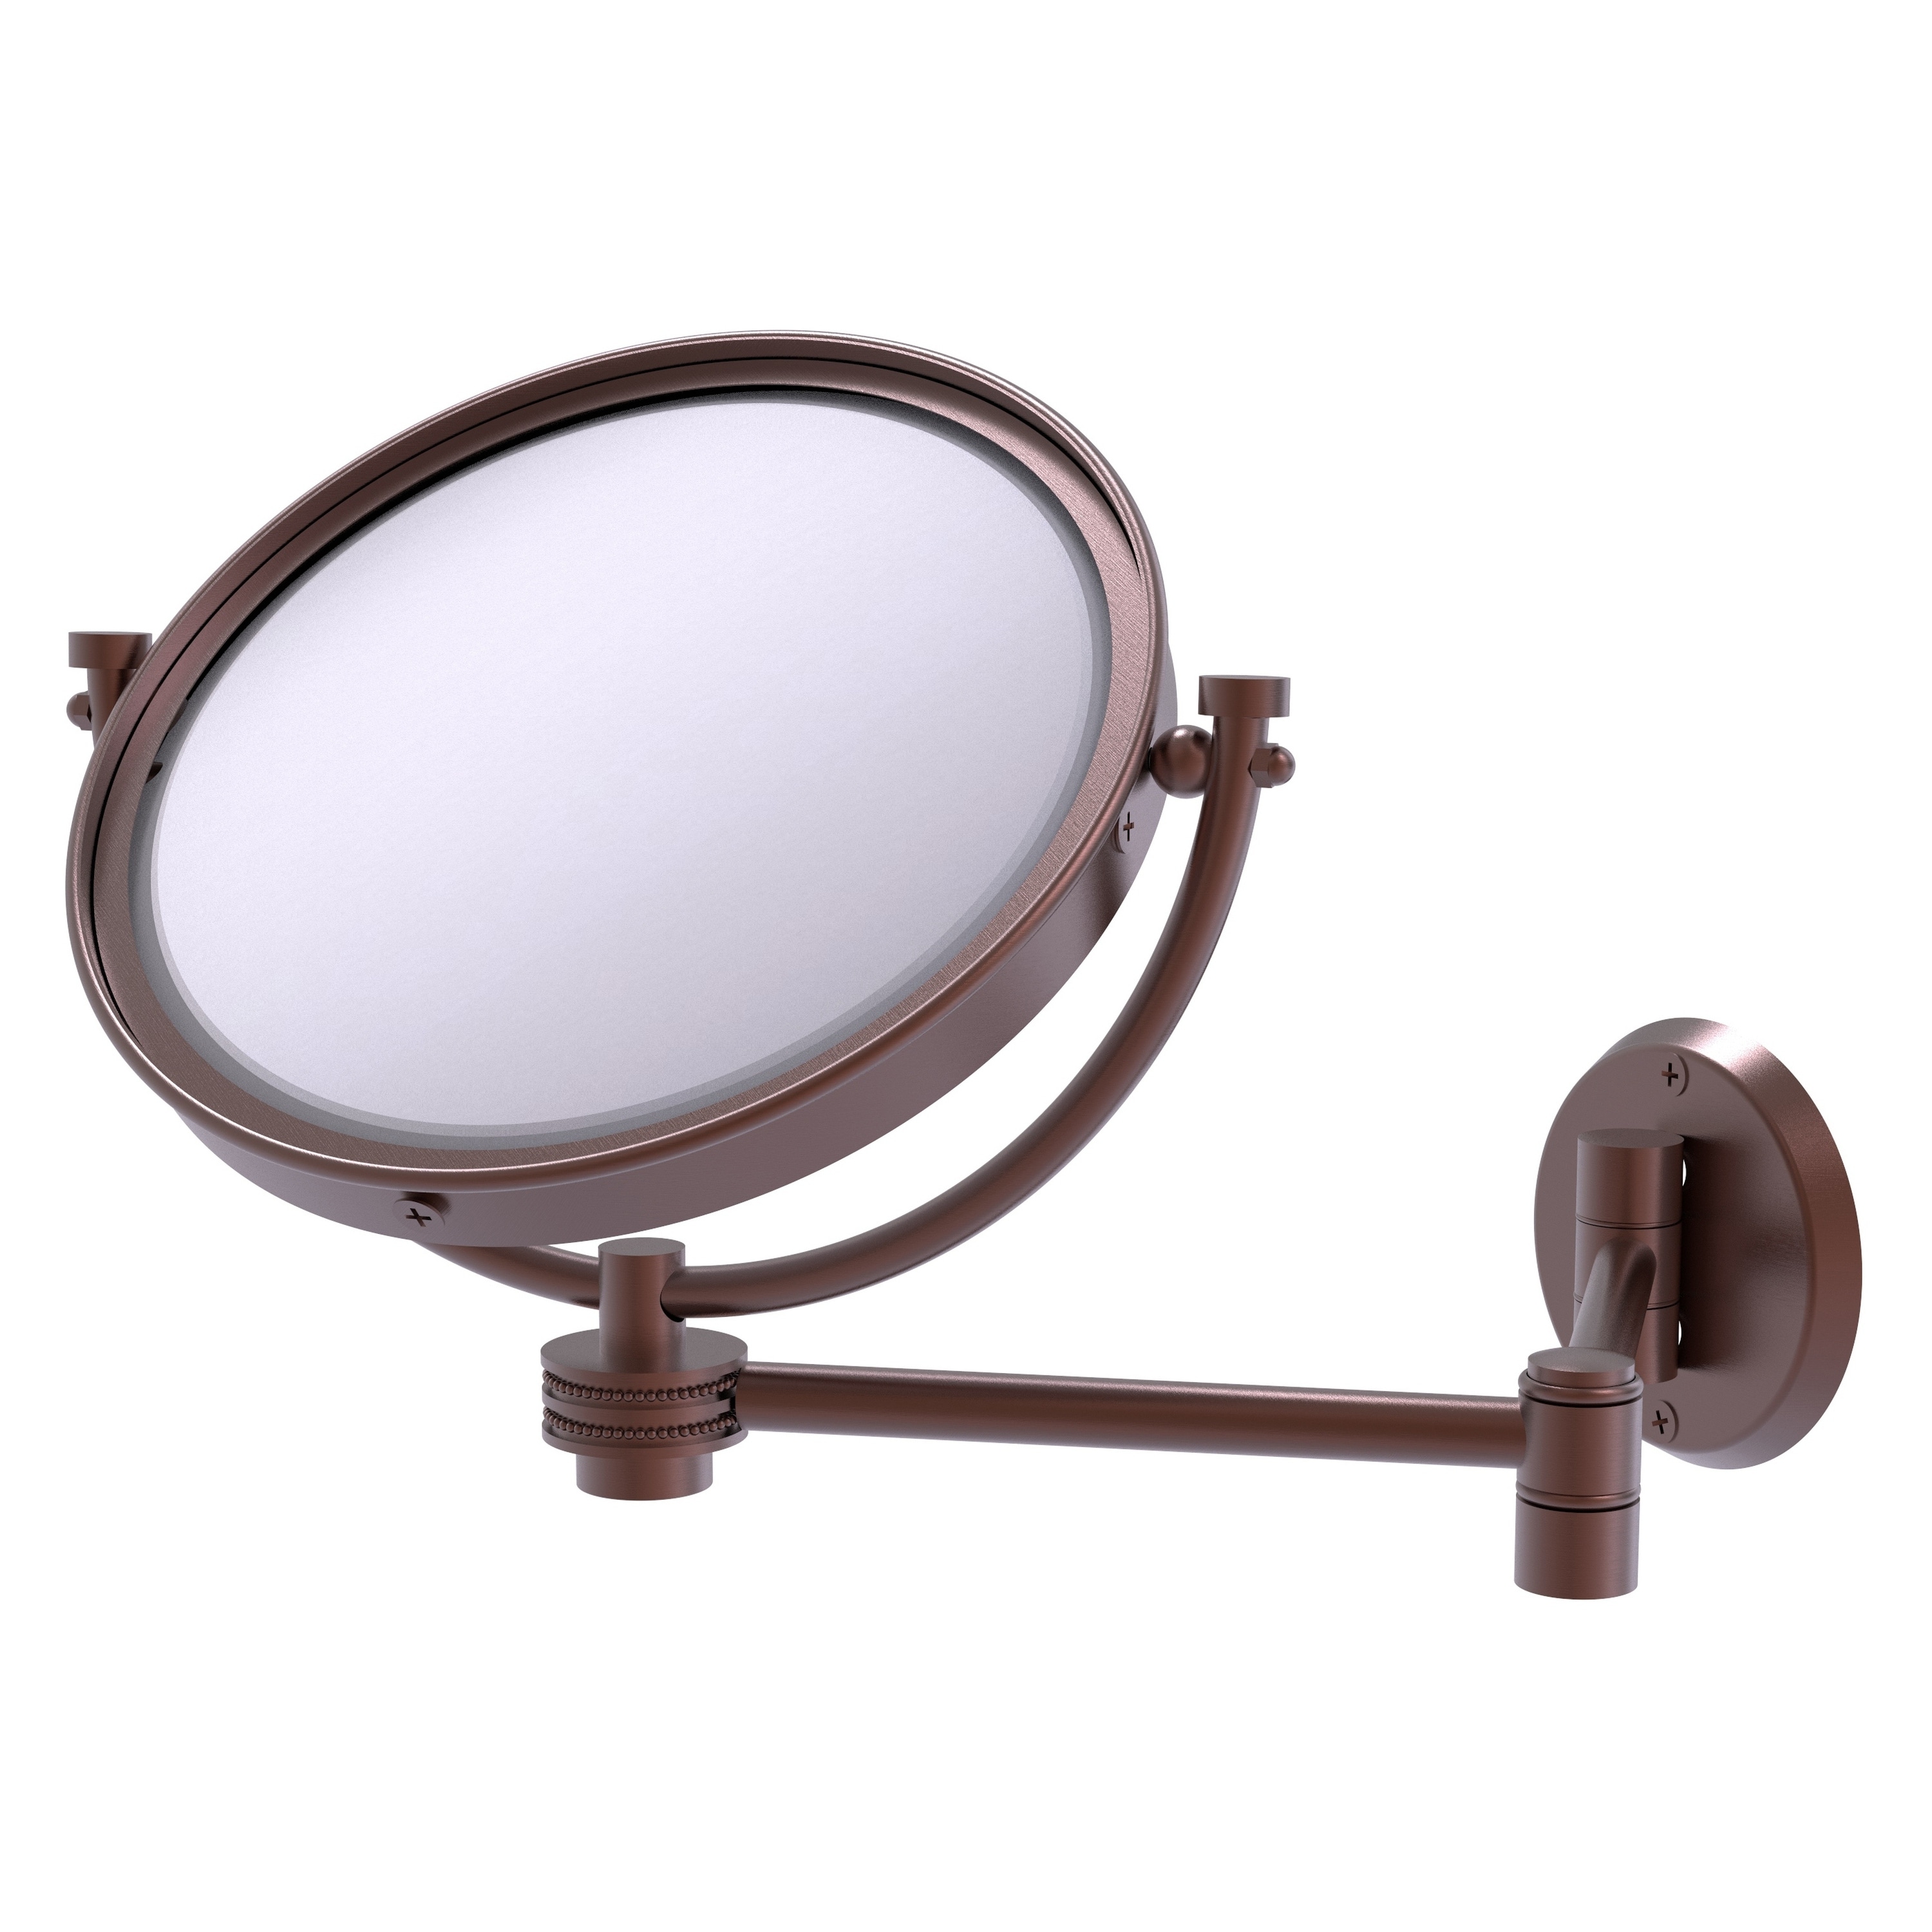 8-in x 10-in Antique Copper Double-sided 2X Magnifying Wall-mounted Vanity Mirror | - Allied Brass WM-6D/2X-CA